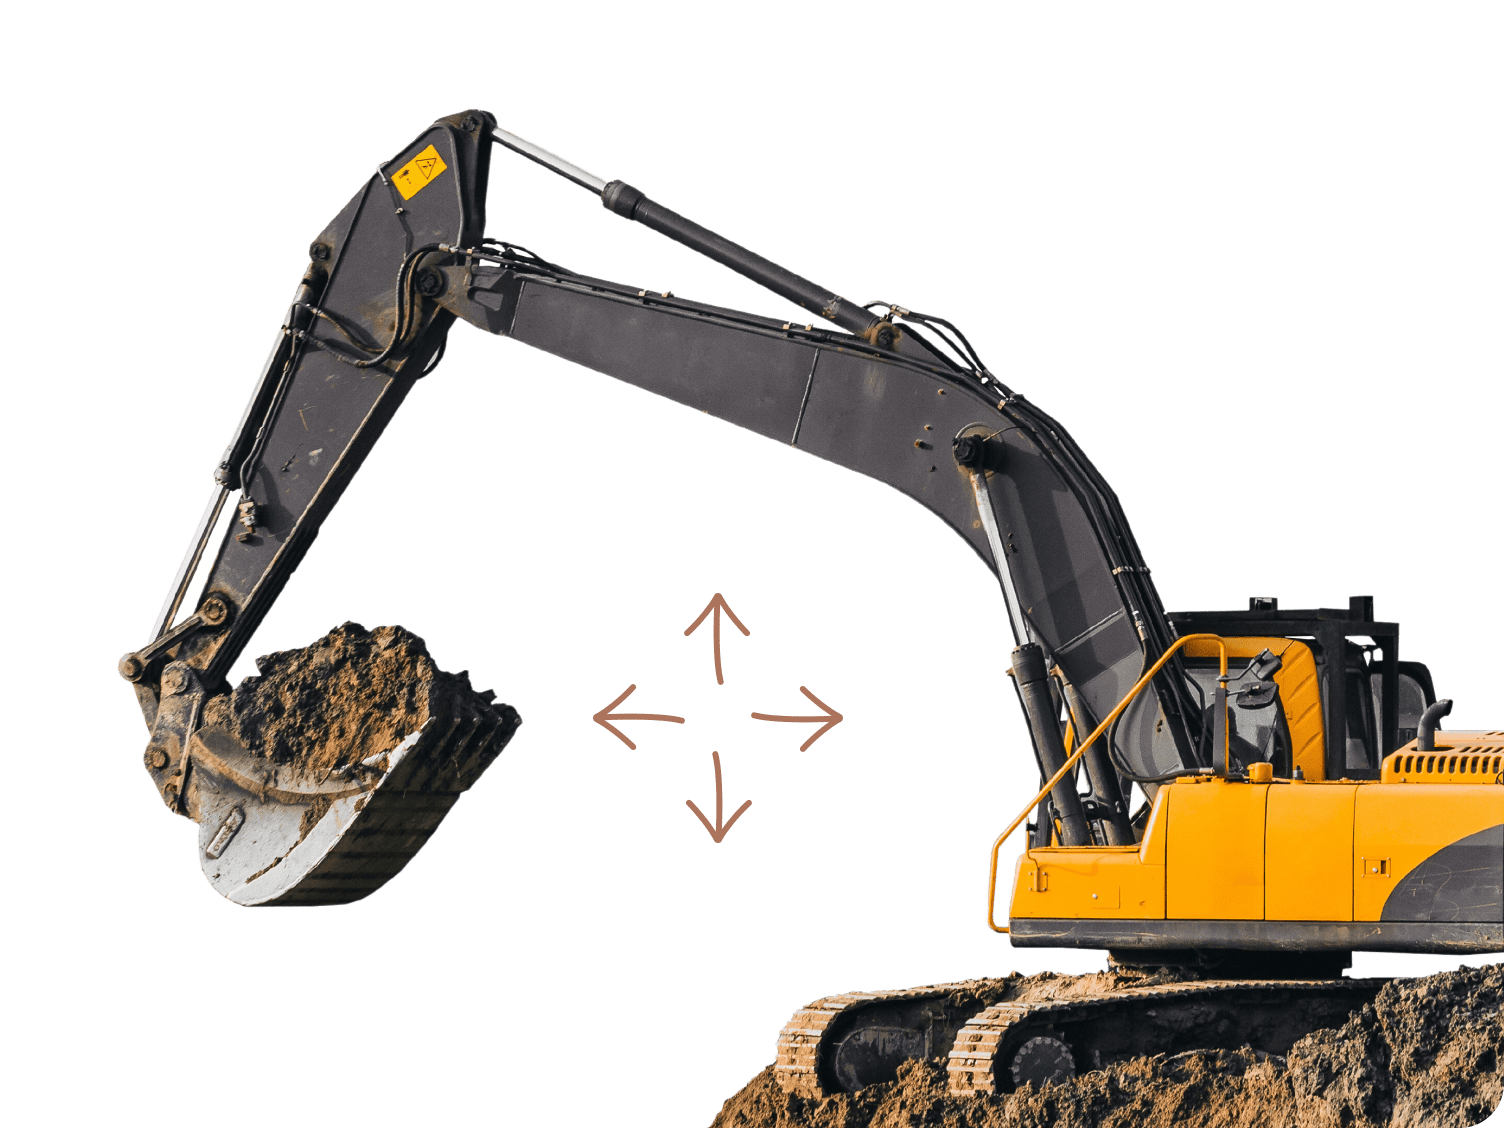 Insurance of construction machinery and equipment (CPM)